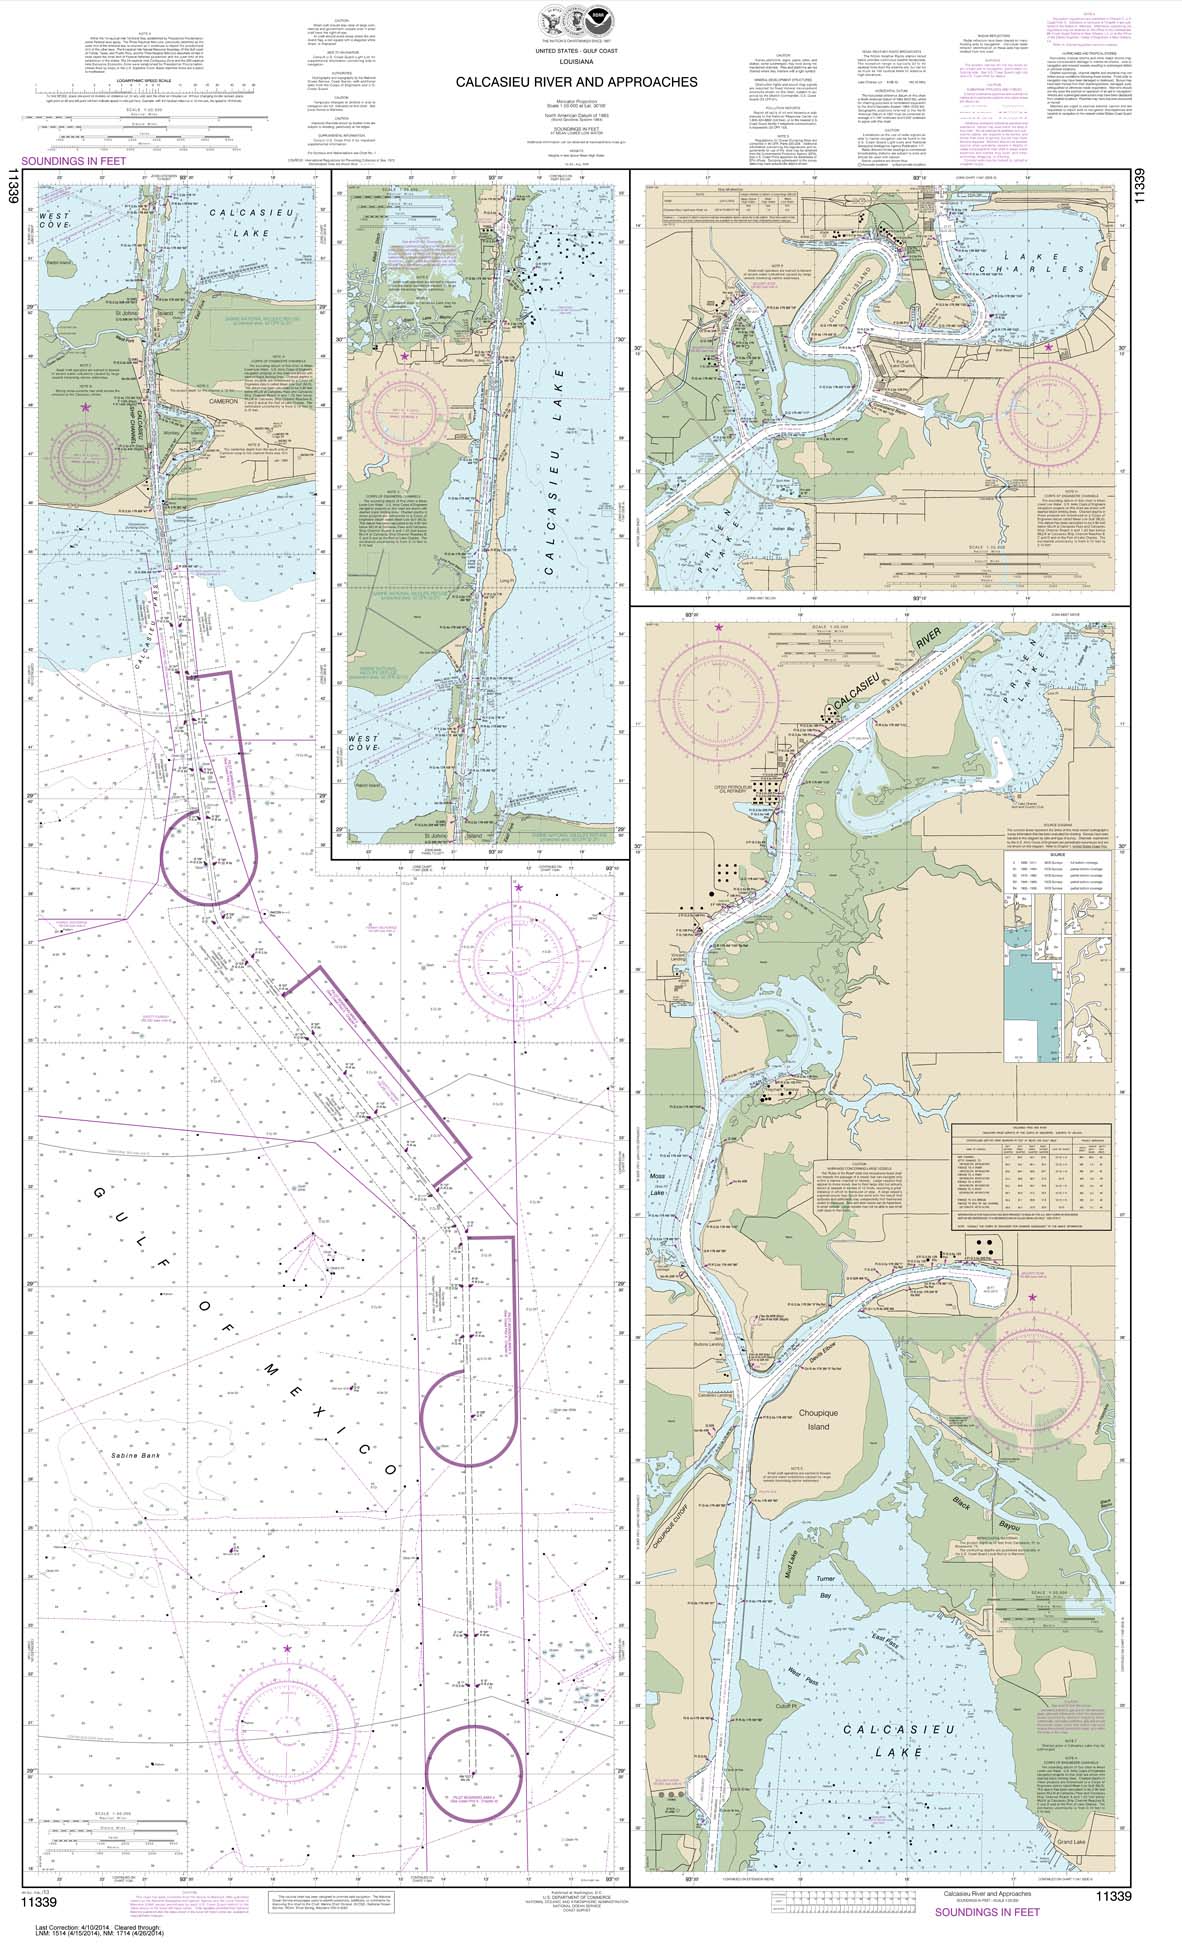 Calcasieu River and Approaches